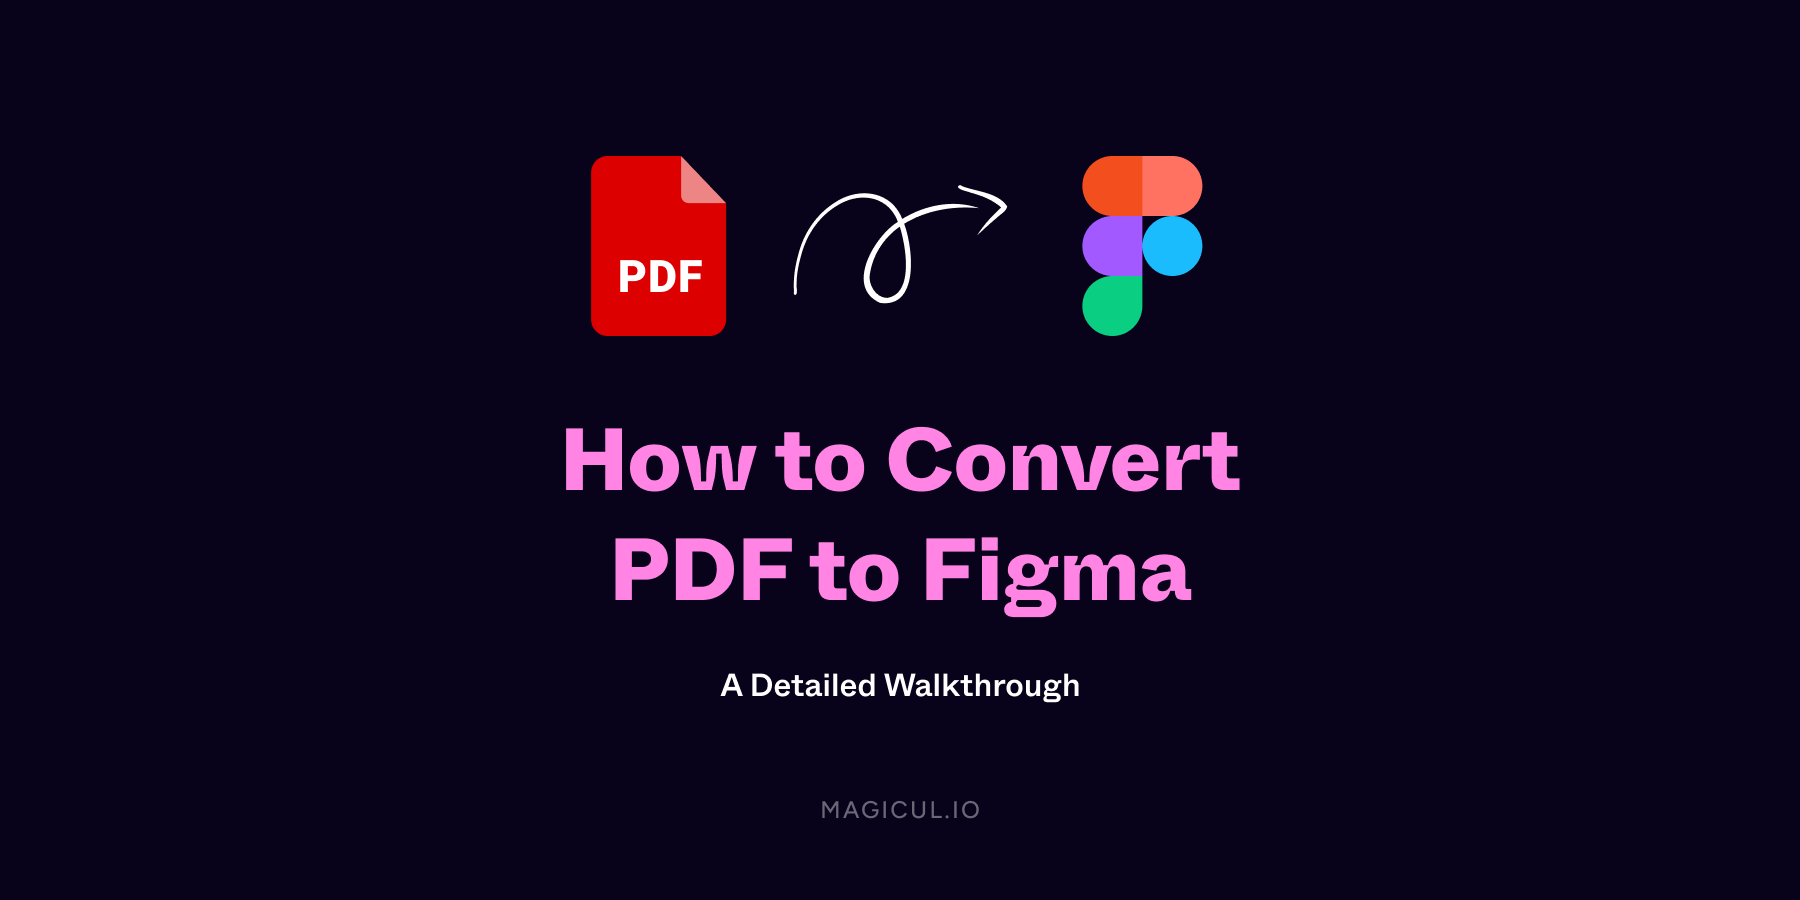 How to Convert PDF to Figma: A Detailed Walkthrough